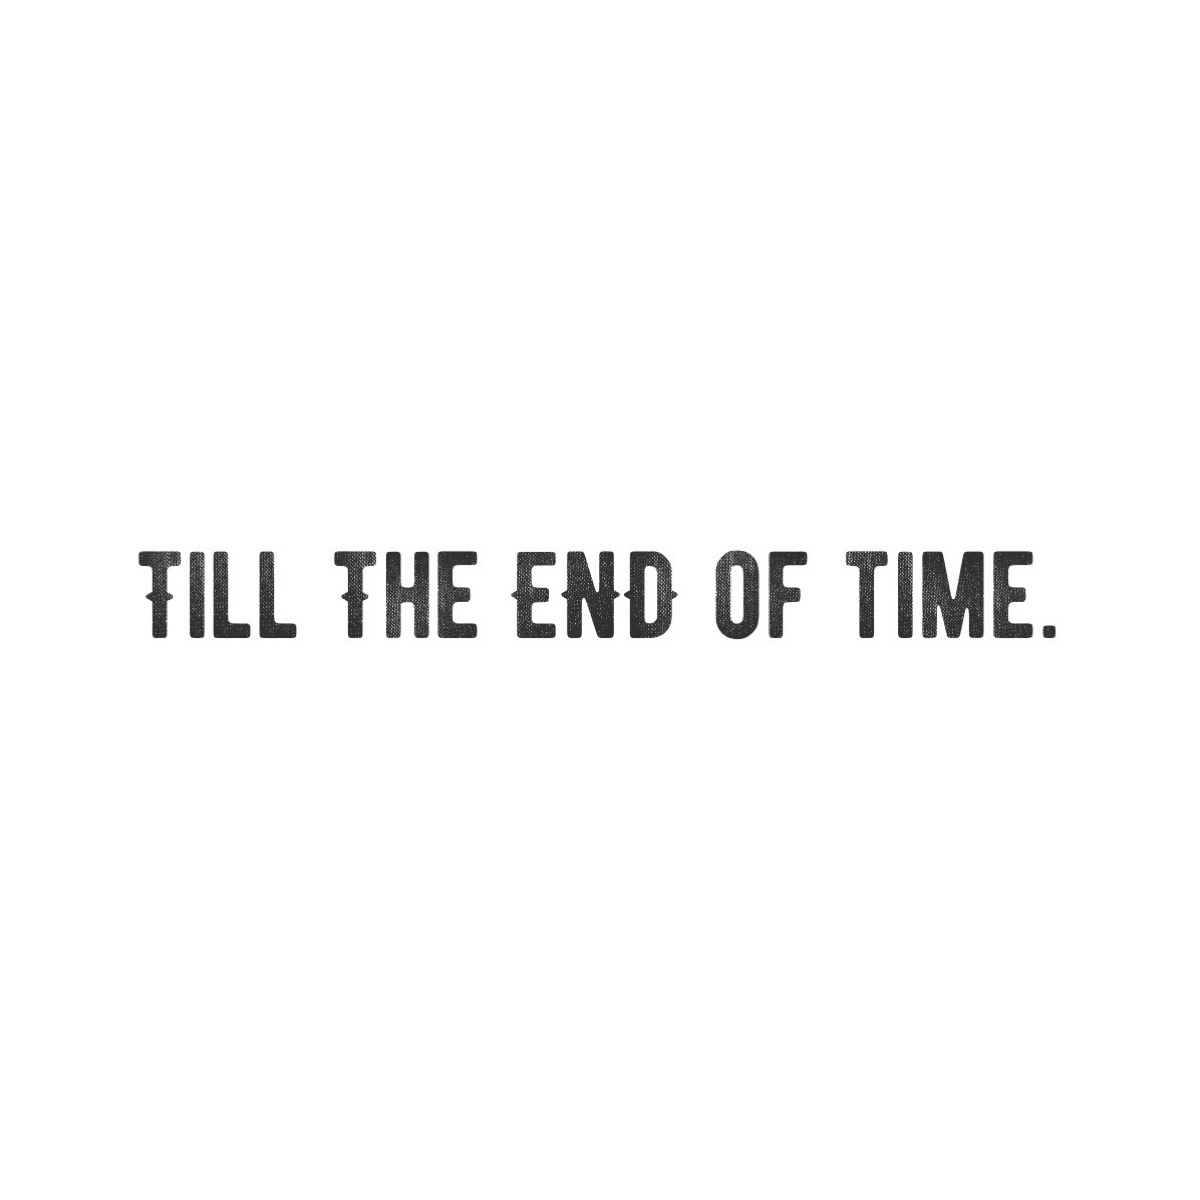 till the end of time.